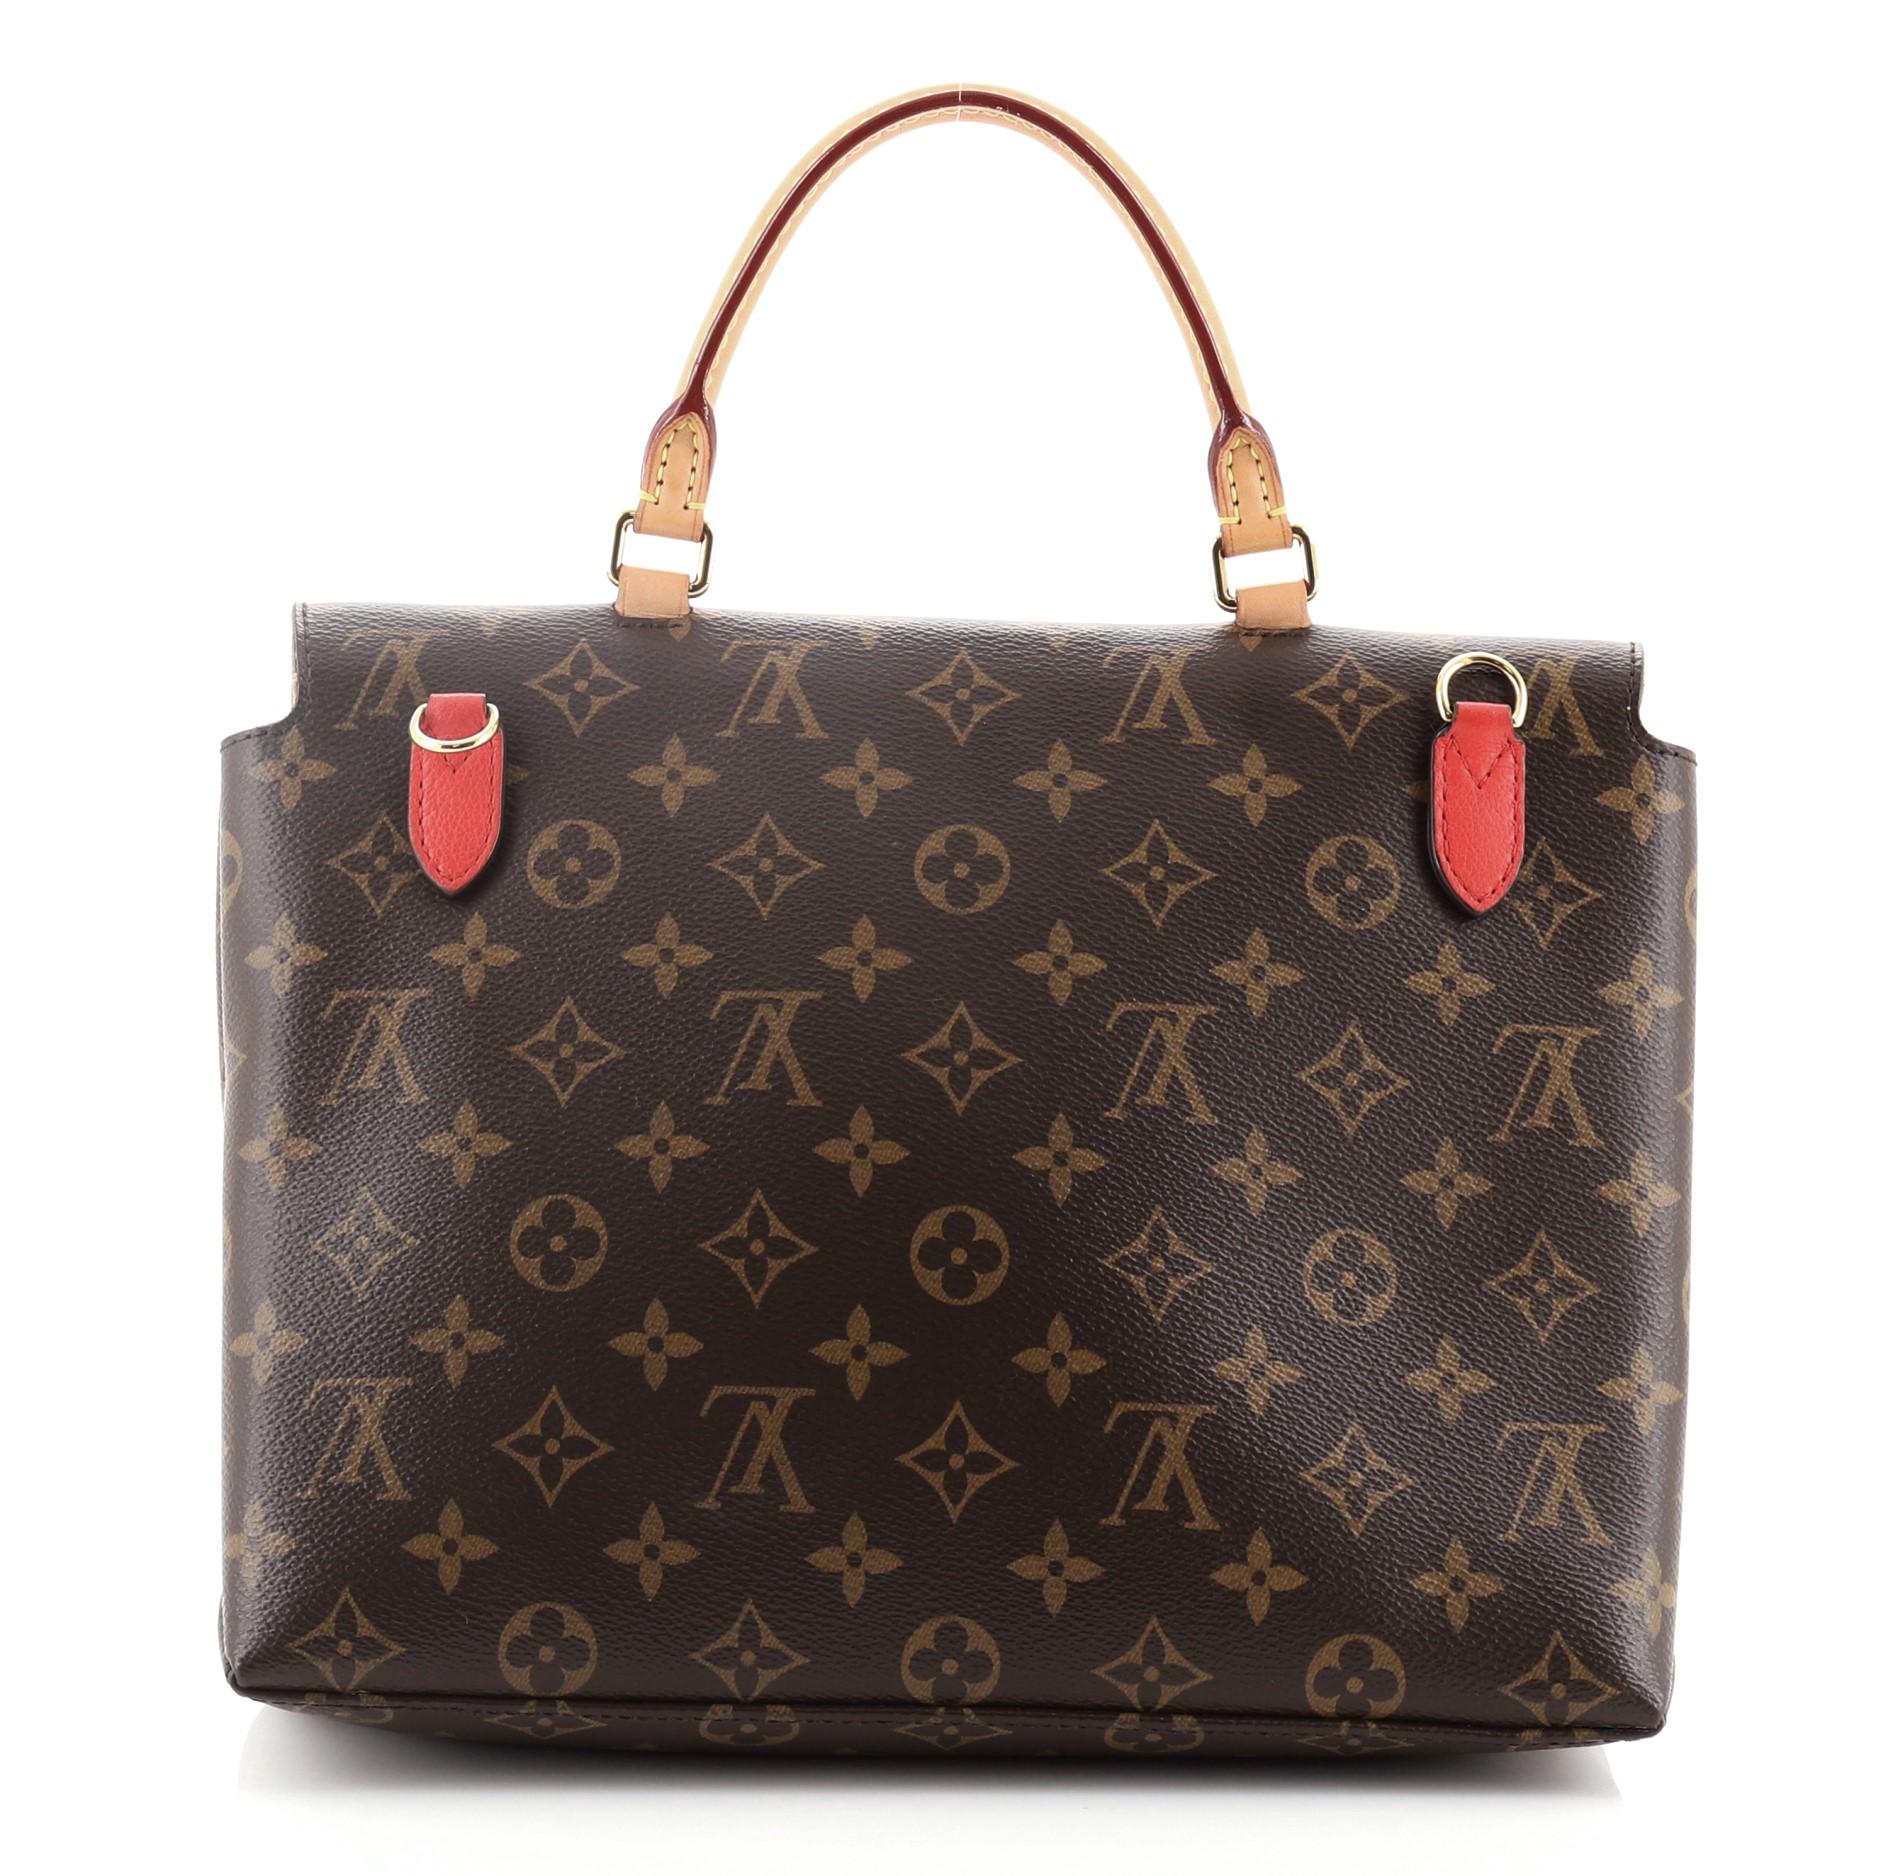 Louis Vuitton Marignan Handbag Monogram Canvas with Leather
Monogram Brown Red Leather

Condition Details: Odor in interior. Darkening, scuffs, wear and watermarks on handle, peeling on strap wax edges, creasing, wear and small indentations